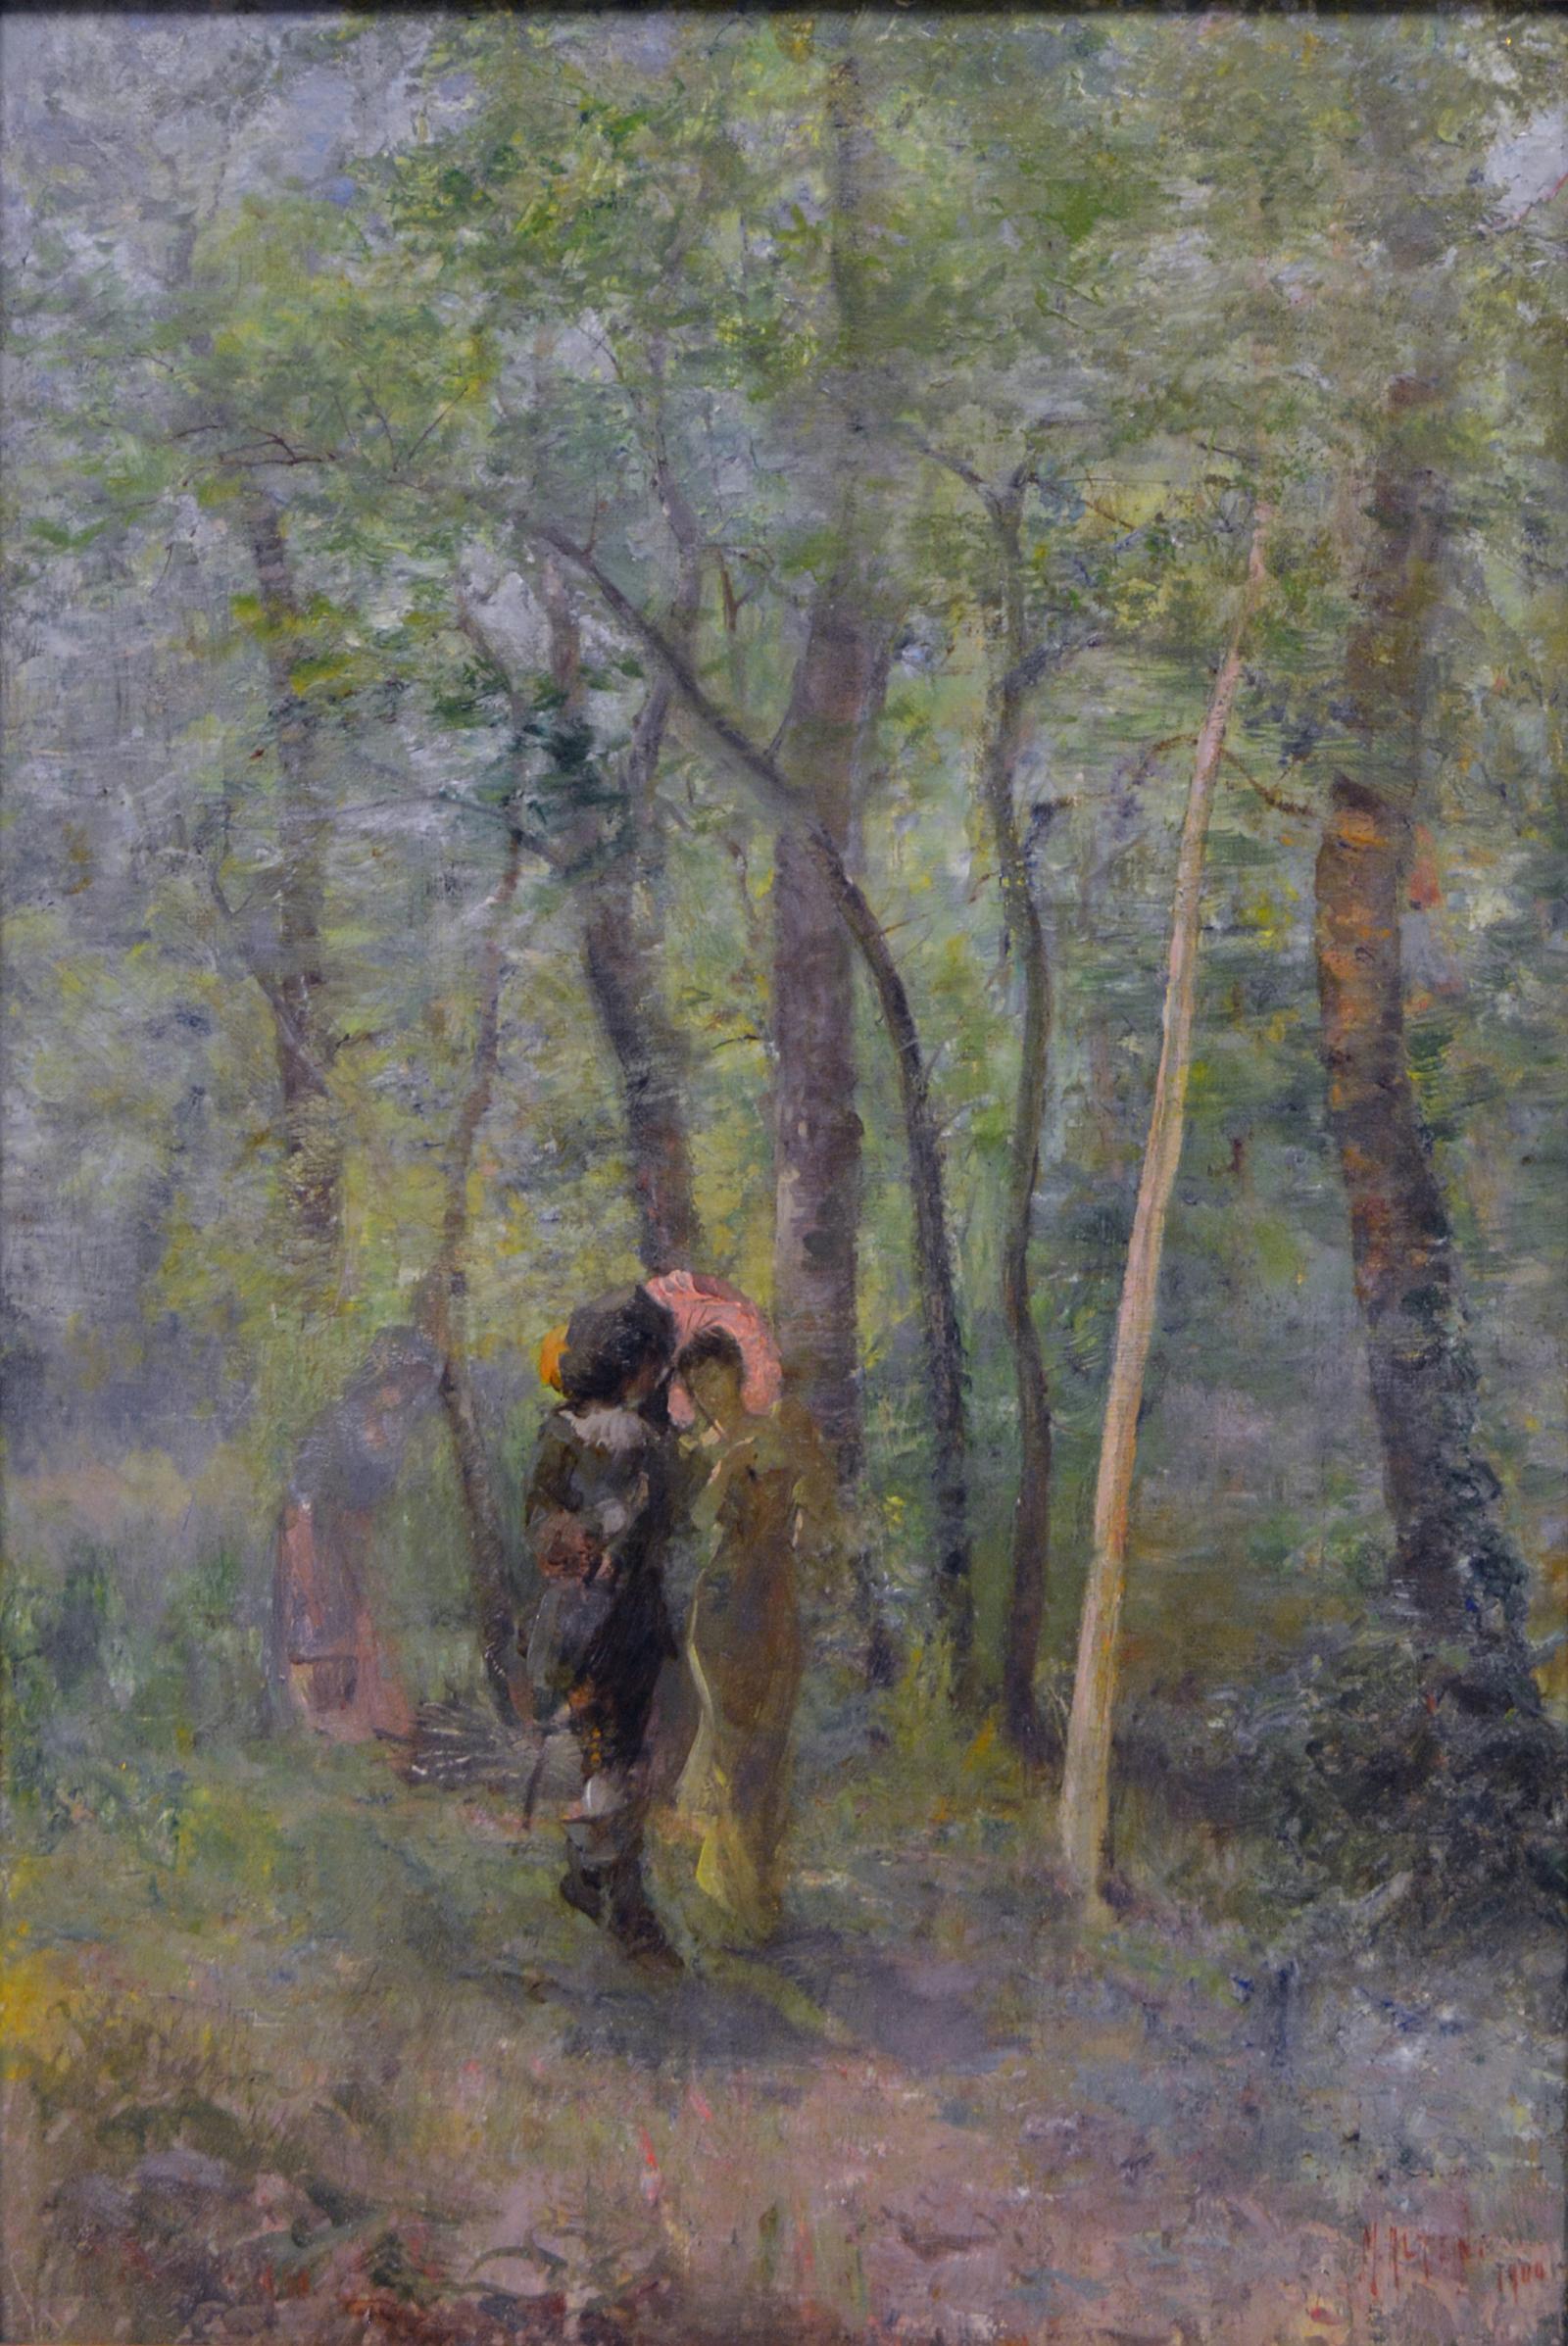 Cavalier (man in black with hat) with a woman in a yellow dress and pink hat under tall trees.